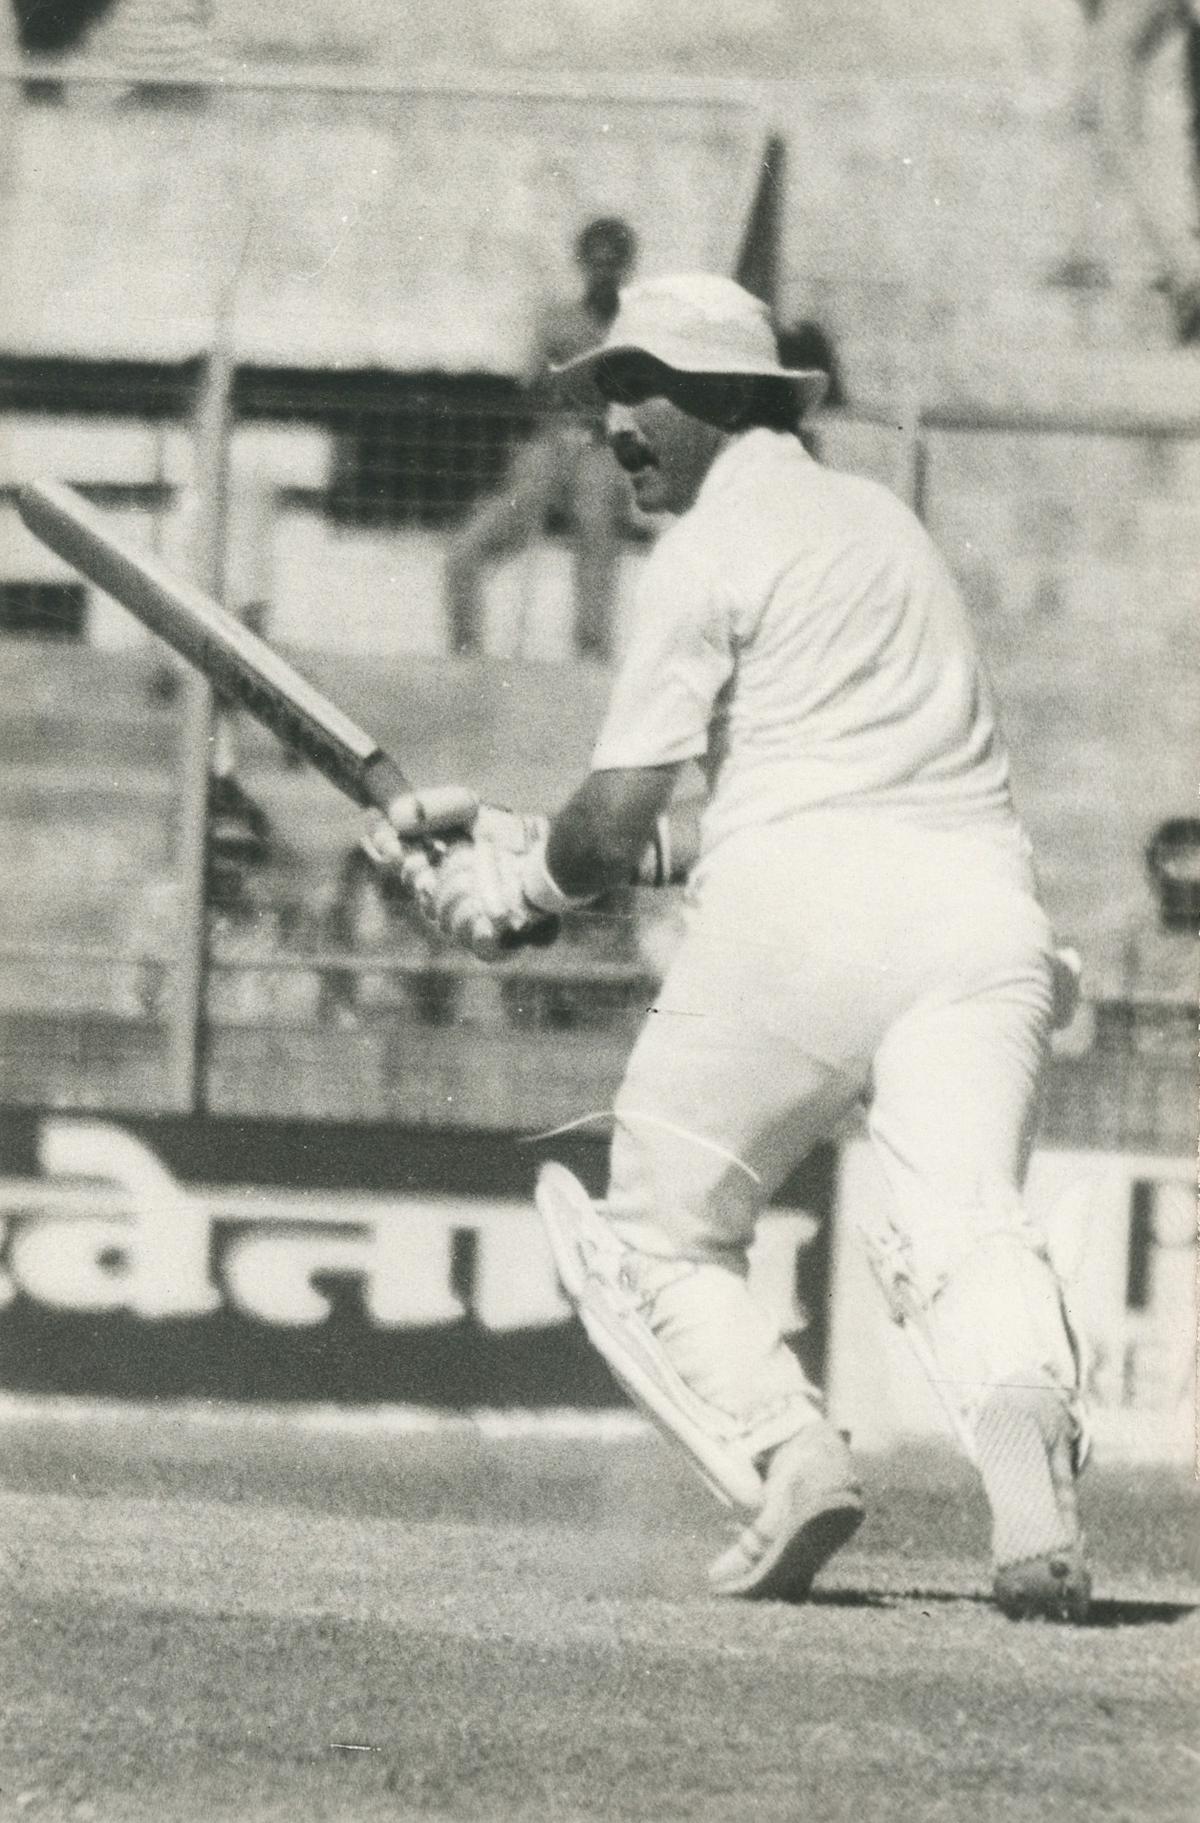 Man of the match England Cricket batsman Graham Gooch turning one to the leg side, on his way to a power packed 61 during the match between Sri Lanka and England in the Cricket Reliance World Cup 1987 at Pune on October 30, 1987.